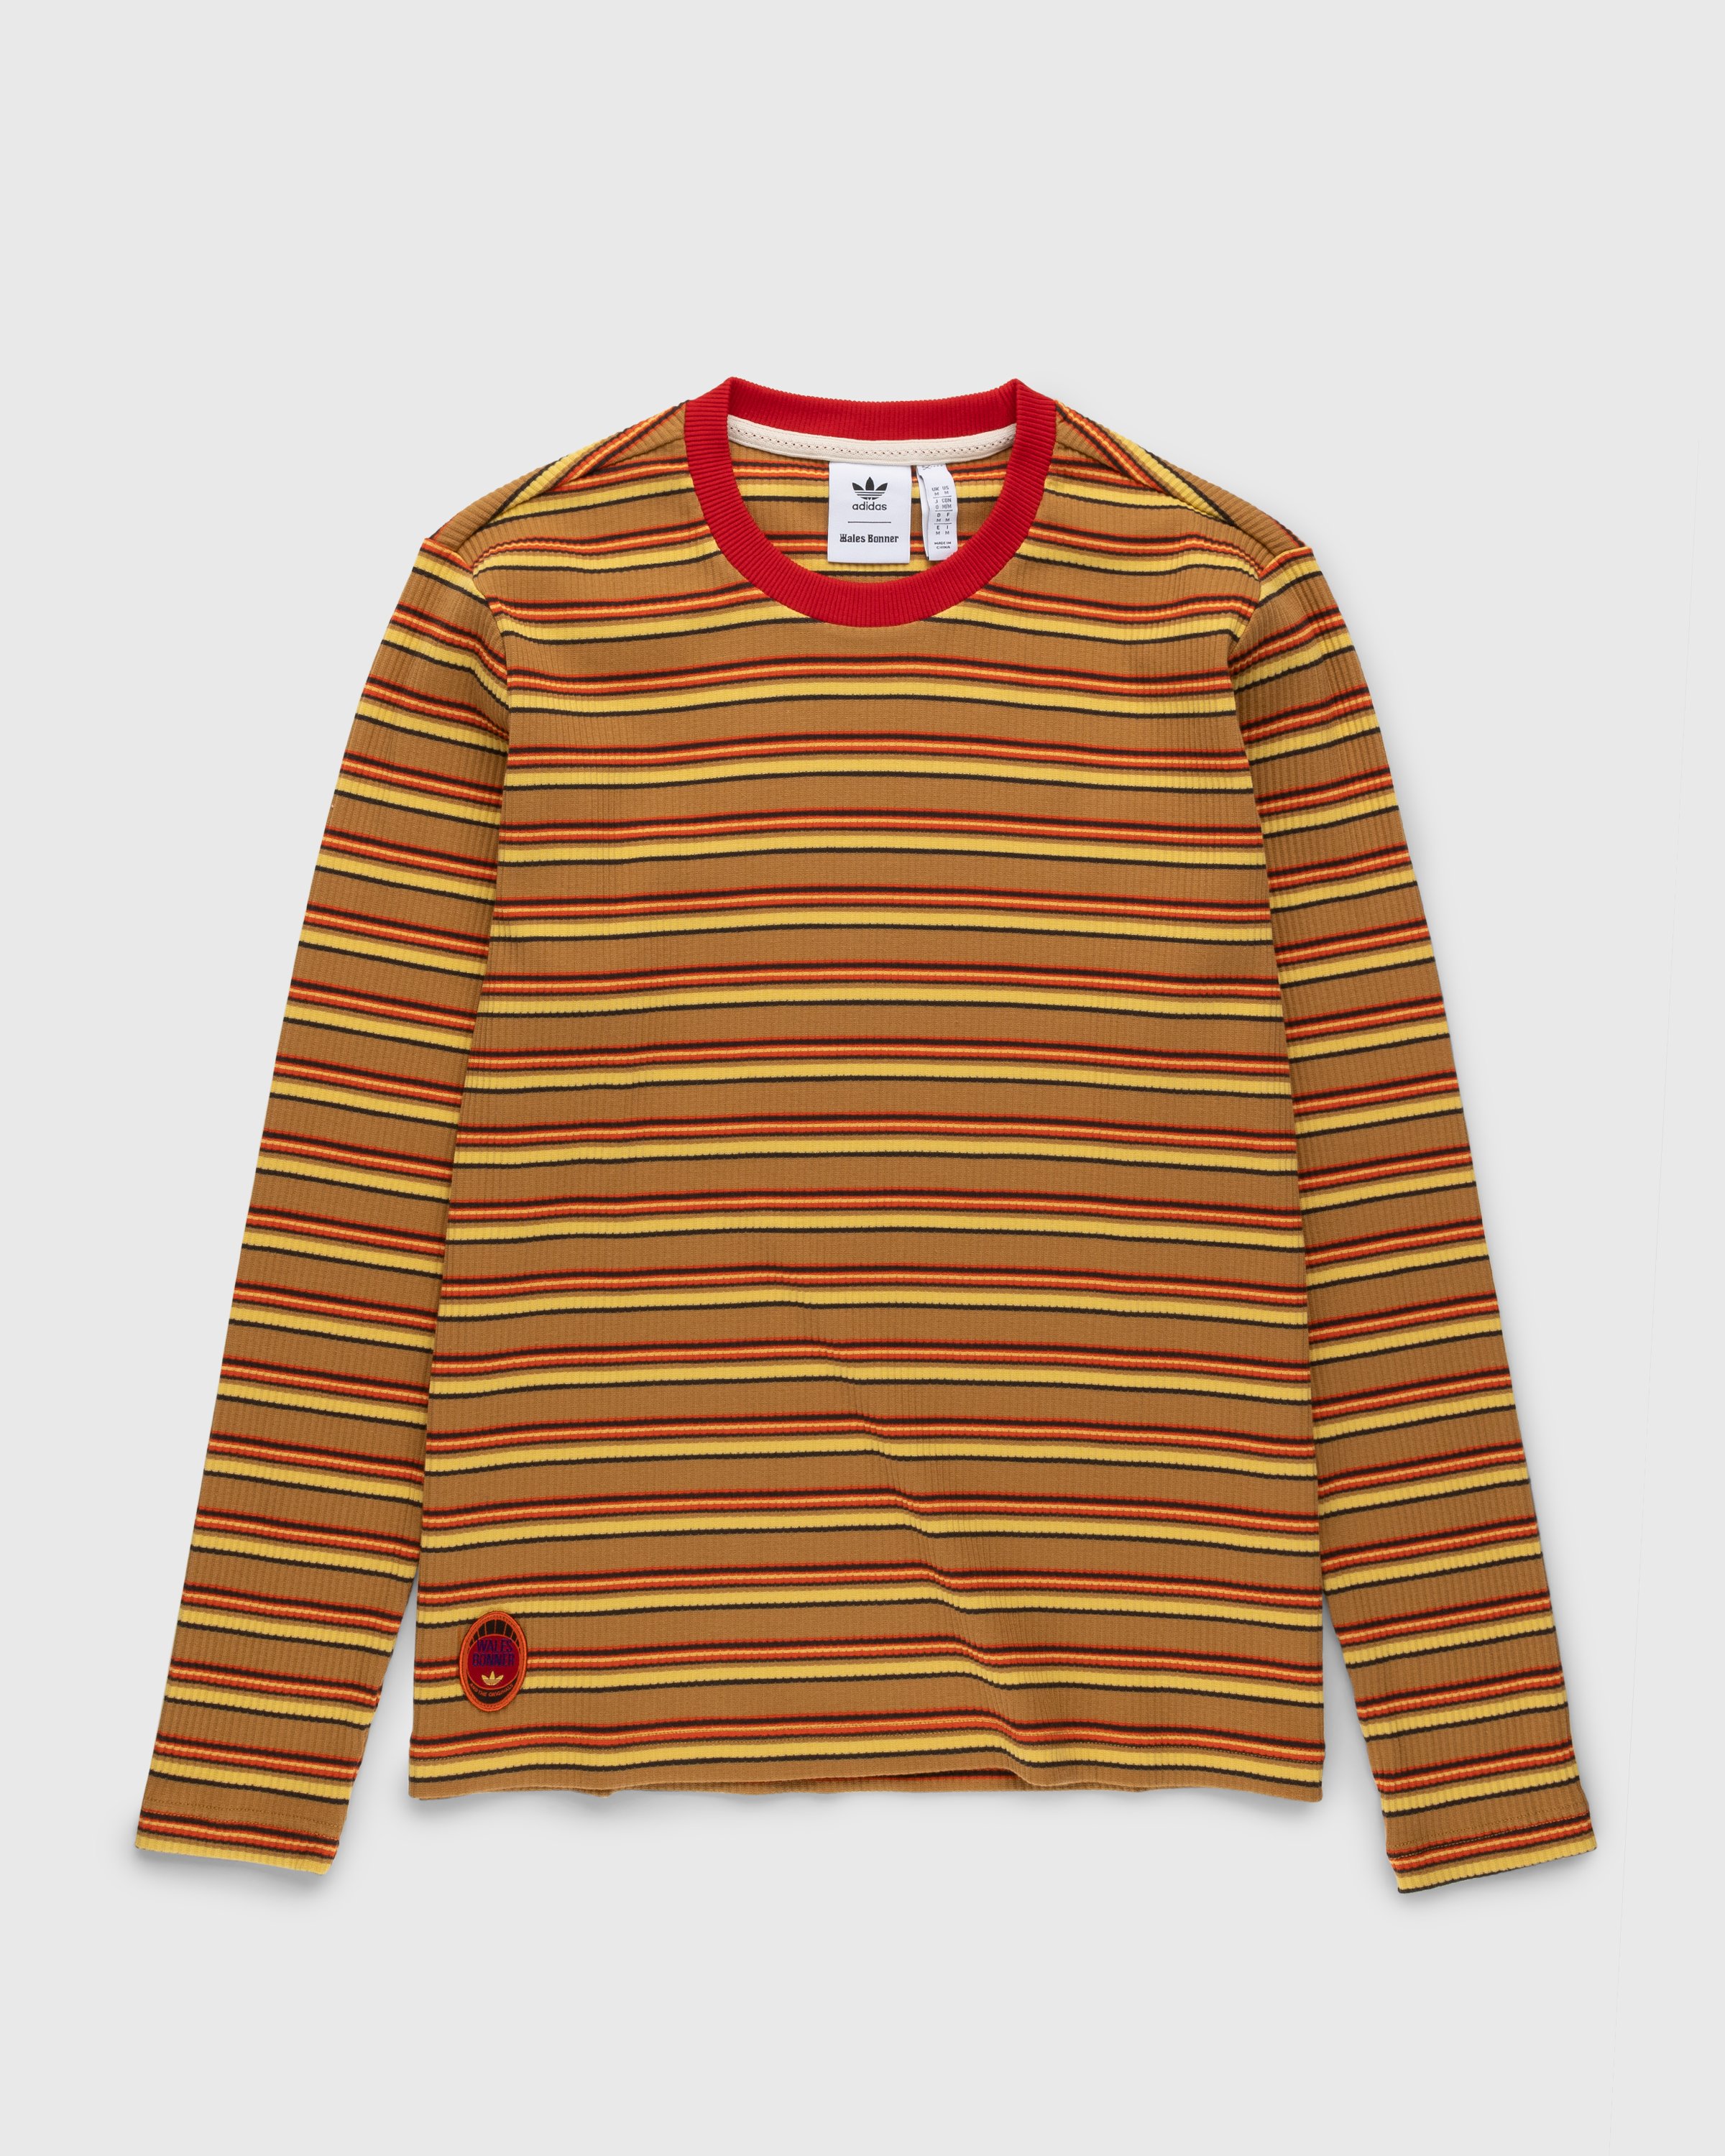 Adidas x Wales Bonner - WB Striped Longsleeve St Fade Gold/Scarlet - Clothing - Red - Image 1